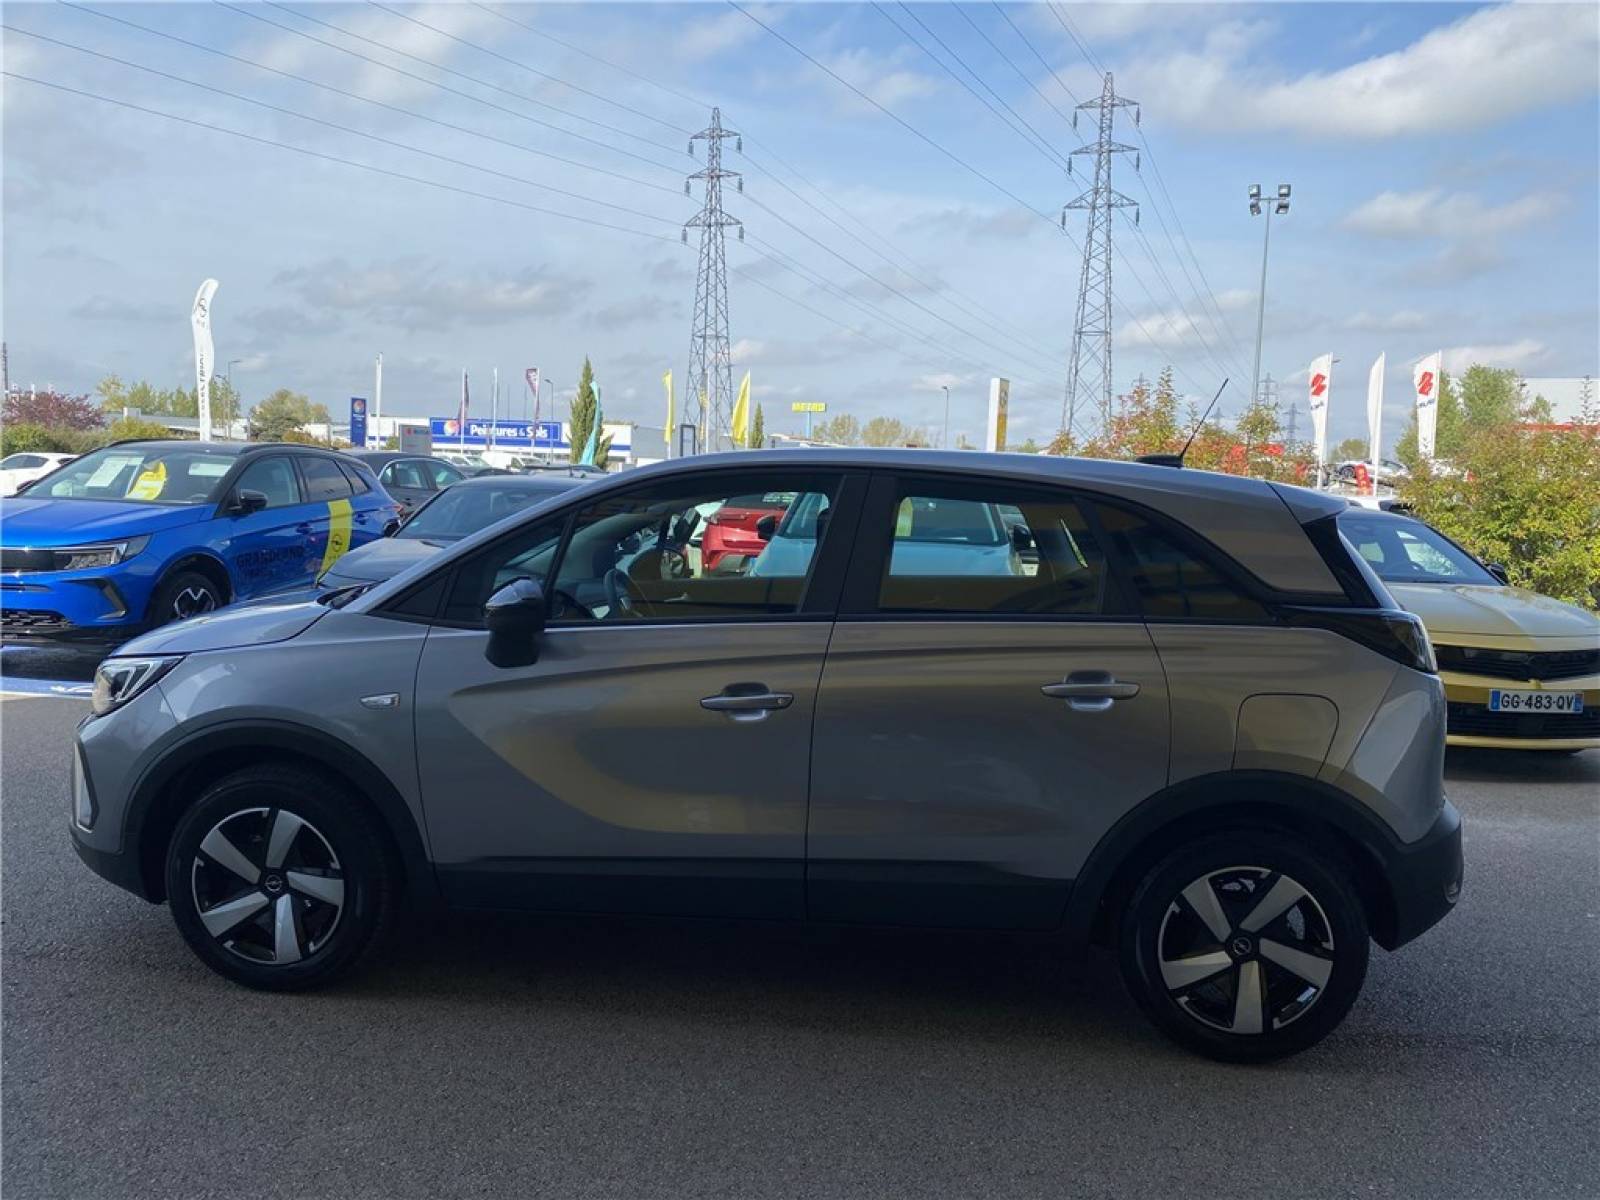 OPEL Crossland 1.2 83 ch - véhicule d'occasion - Groupe Guillet - Opel Magicauto Chalon - 71380 - Saint-Marcel - 4